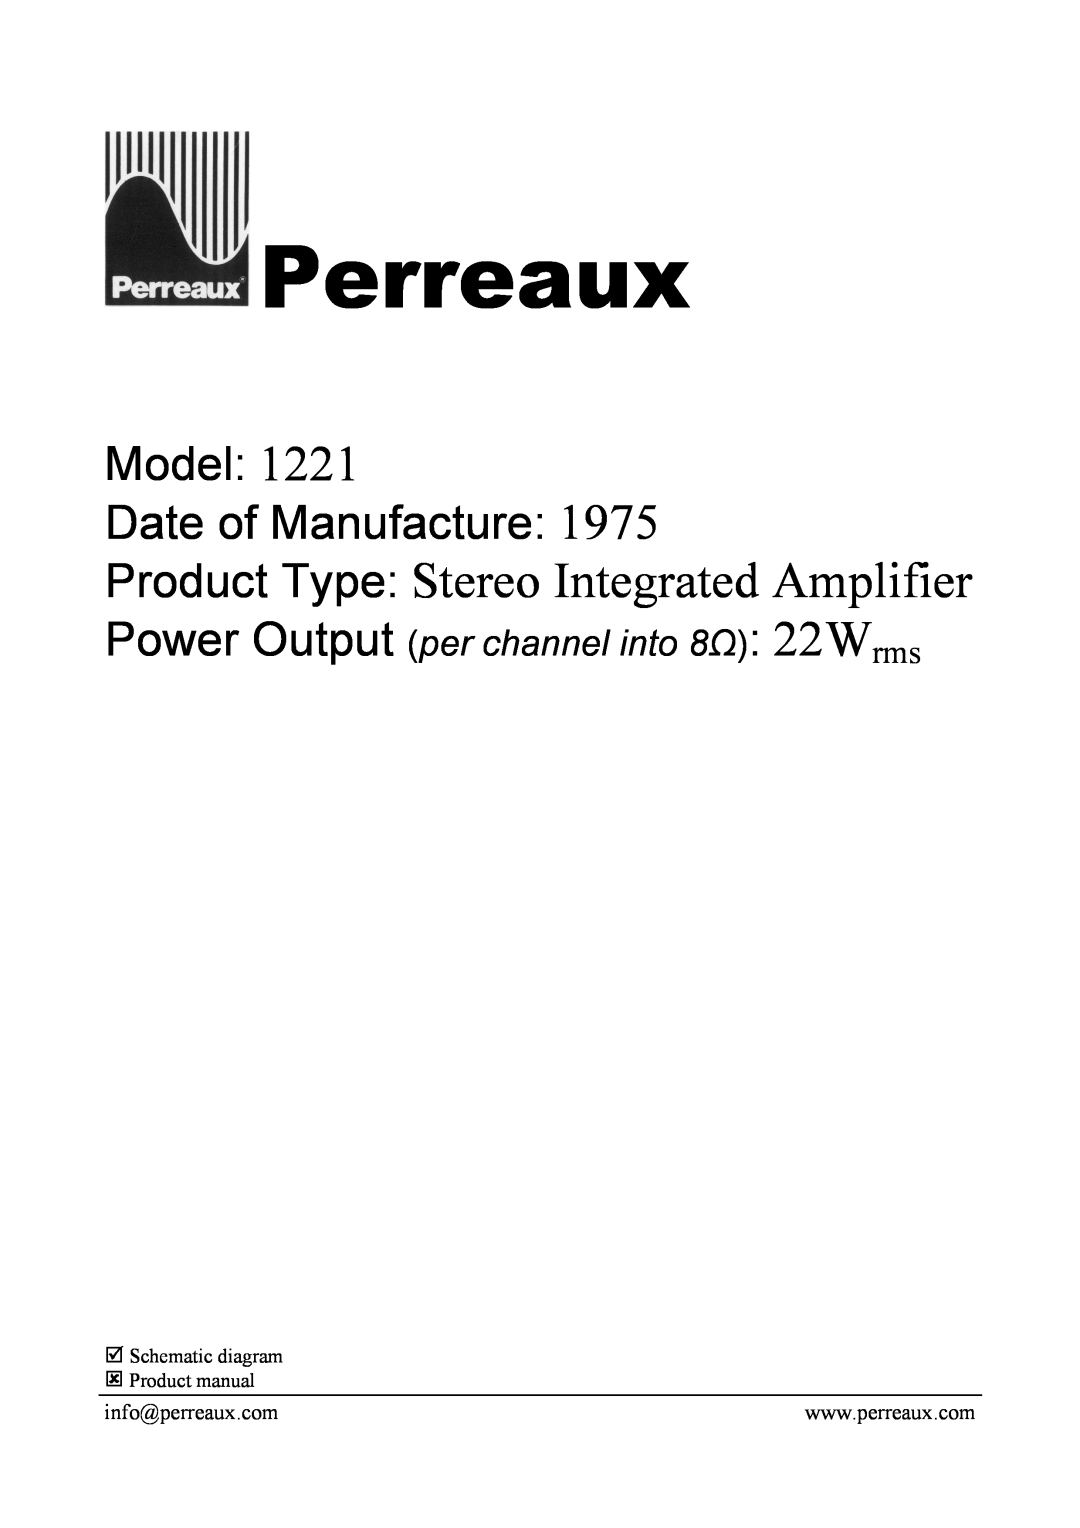 Perreaux 1221 manual Perreaux, Product Type Stereo Integrated Amplifier, Model Date of Manufacture, info@perreaux.com 